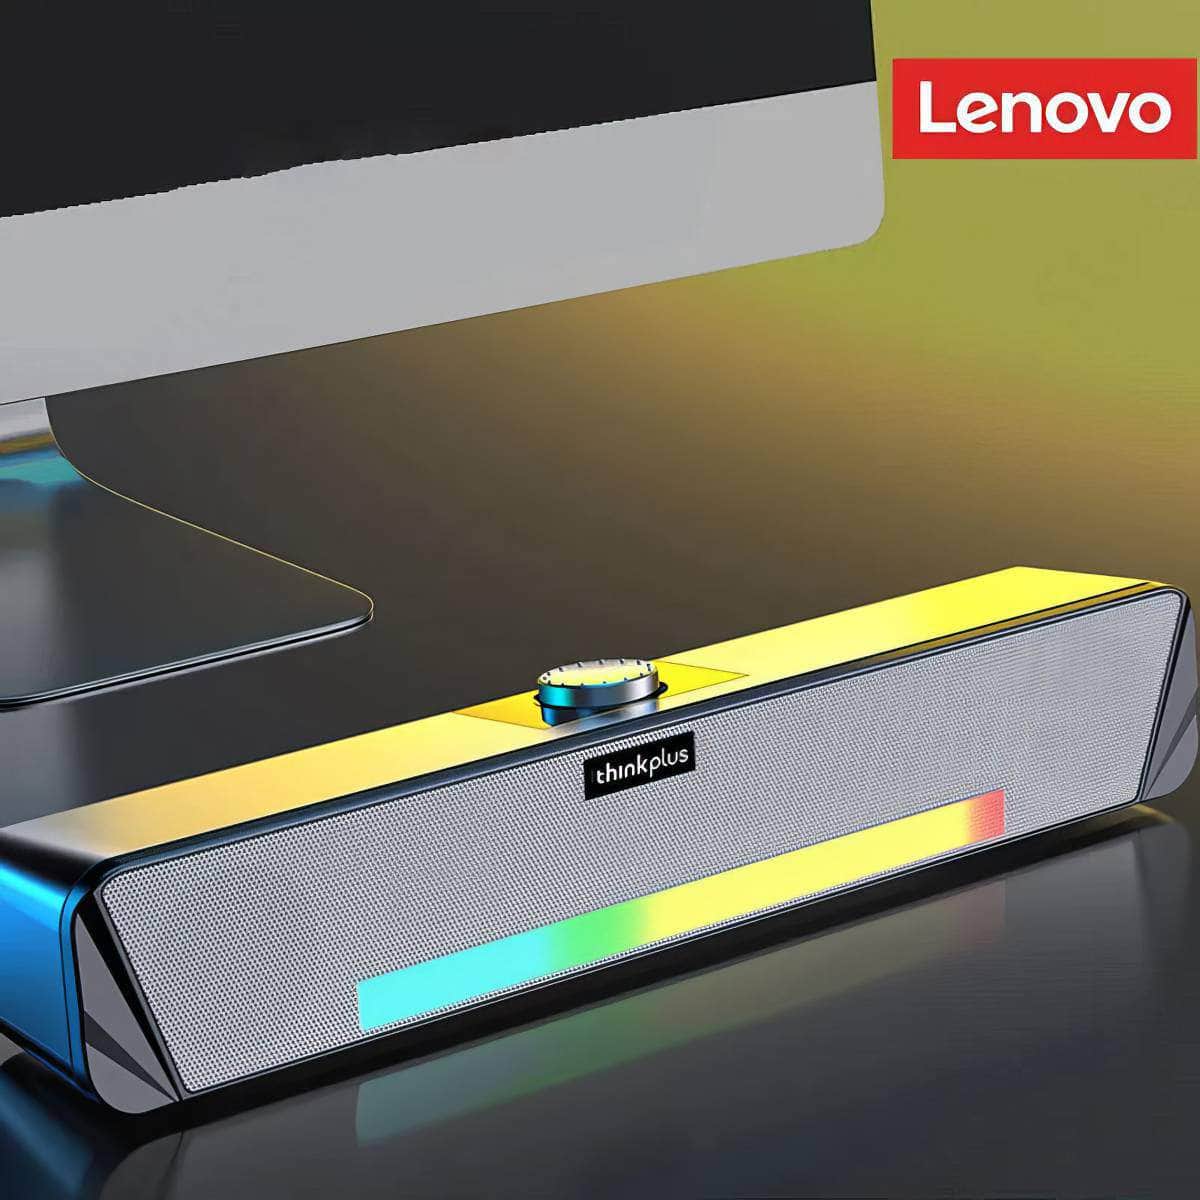 Lenovo TS33: Wired & Bluetooth 5.0 Surround Sound Speaker TS33 B / 2 inches